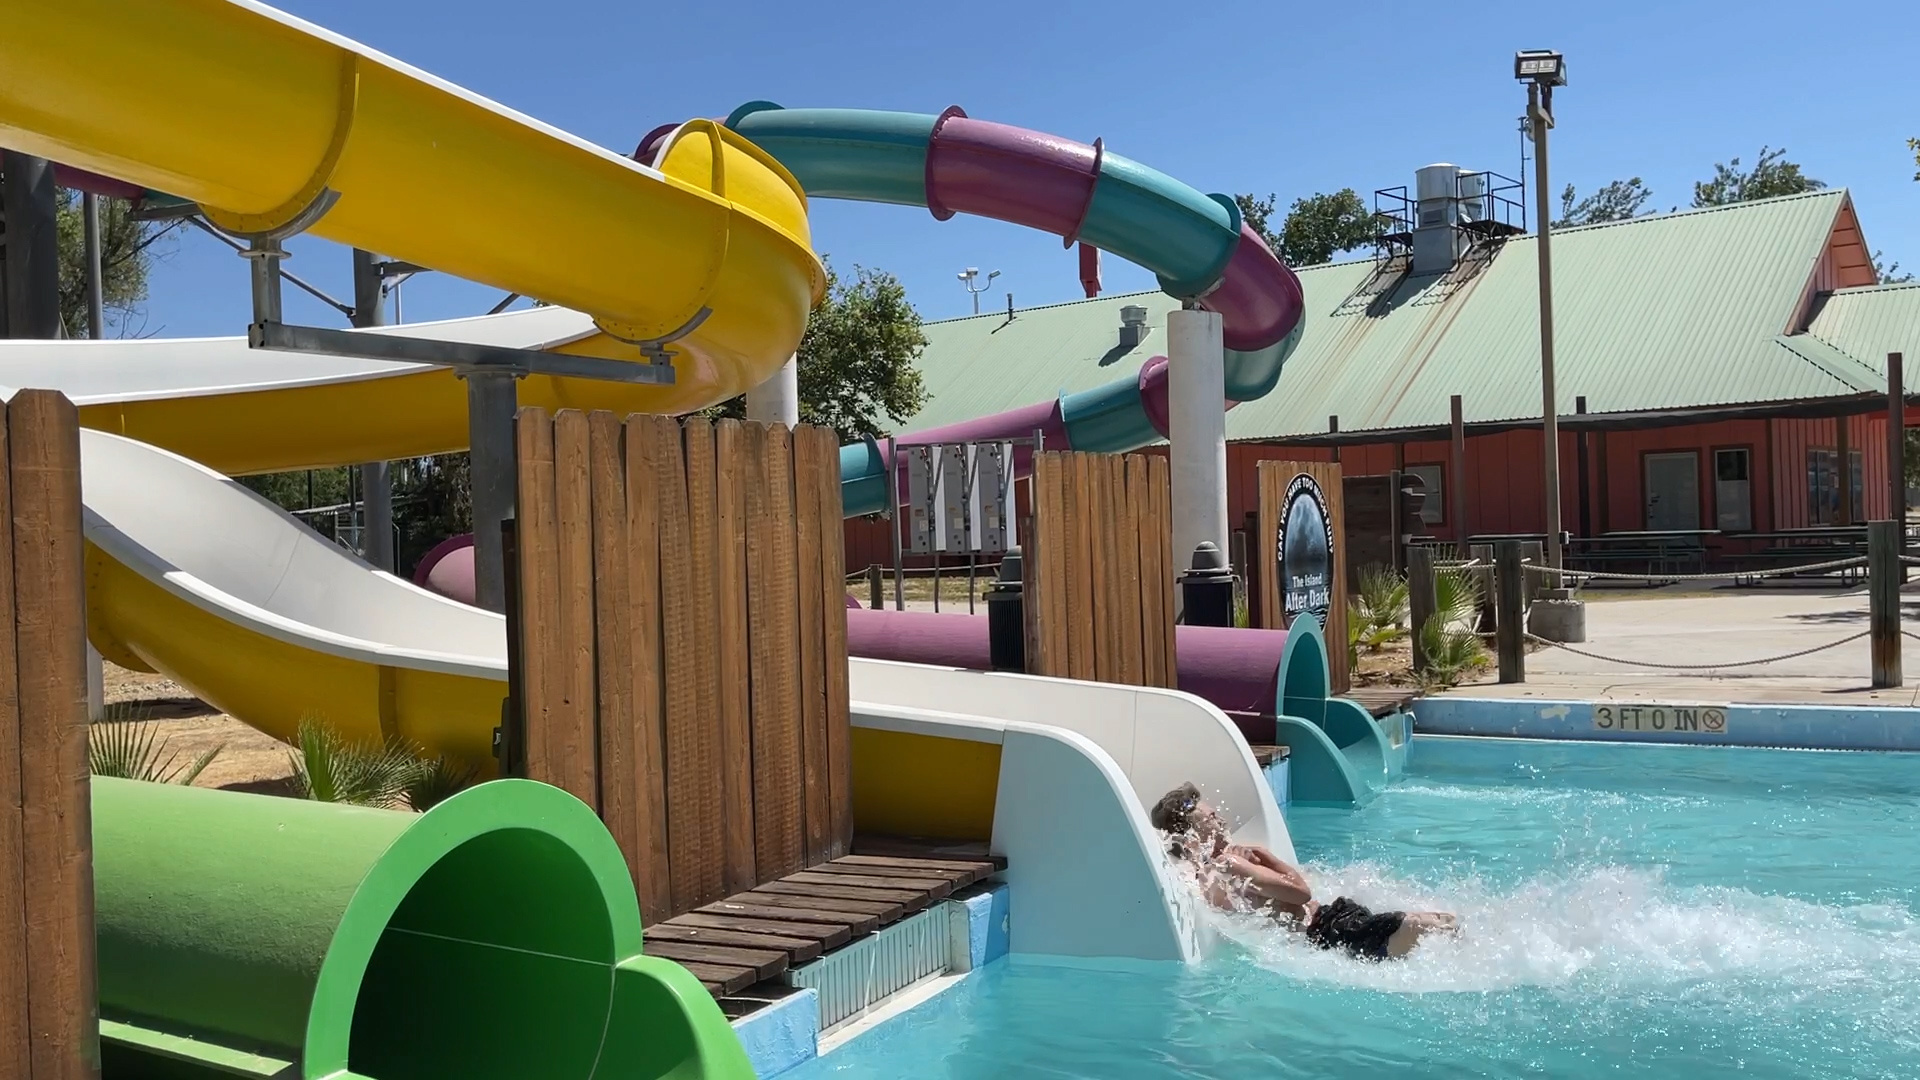 Waterpark: An outdoor area with swimming pools and aqua activities. 1920x1080 Full HD Wallpaper.